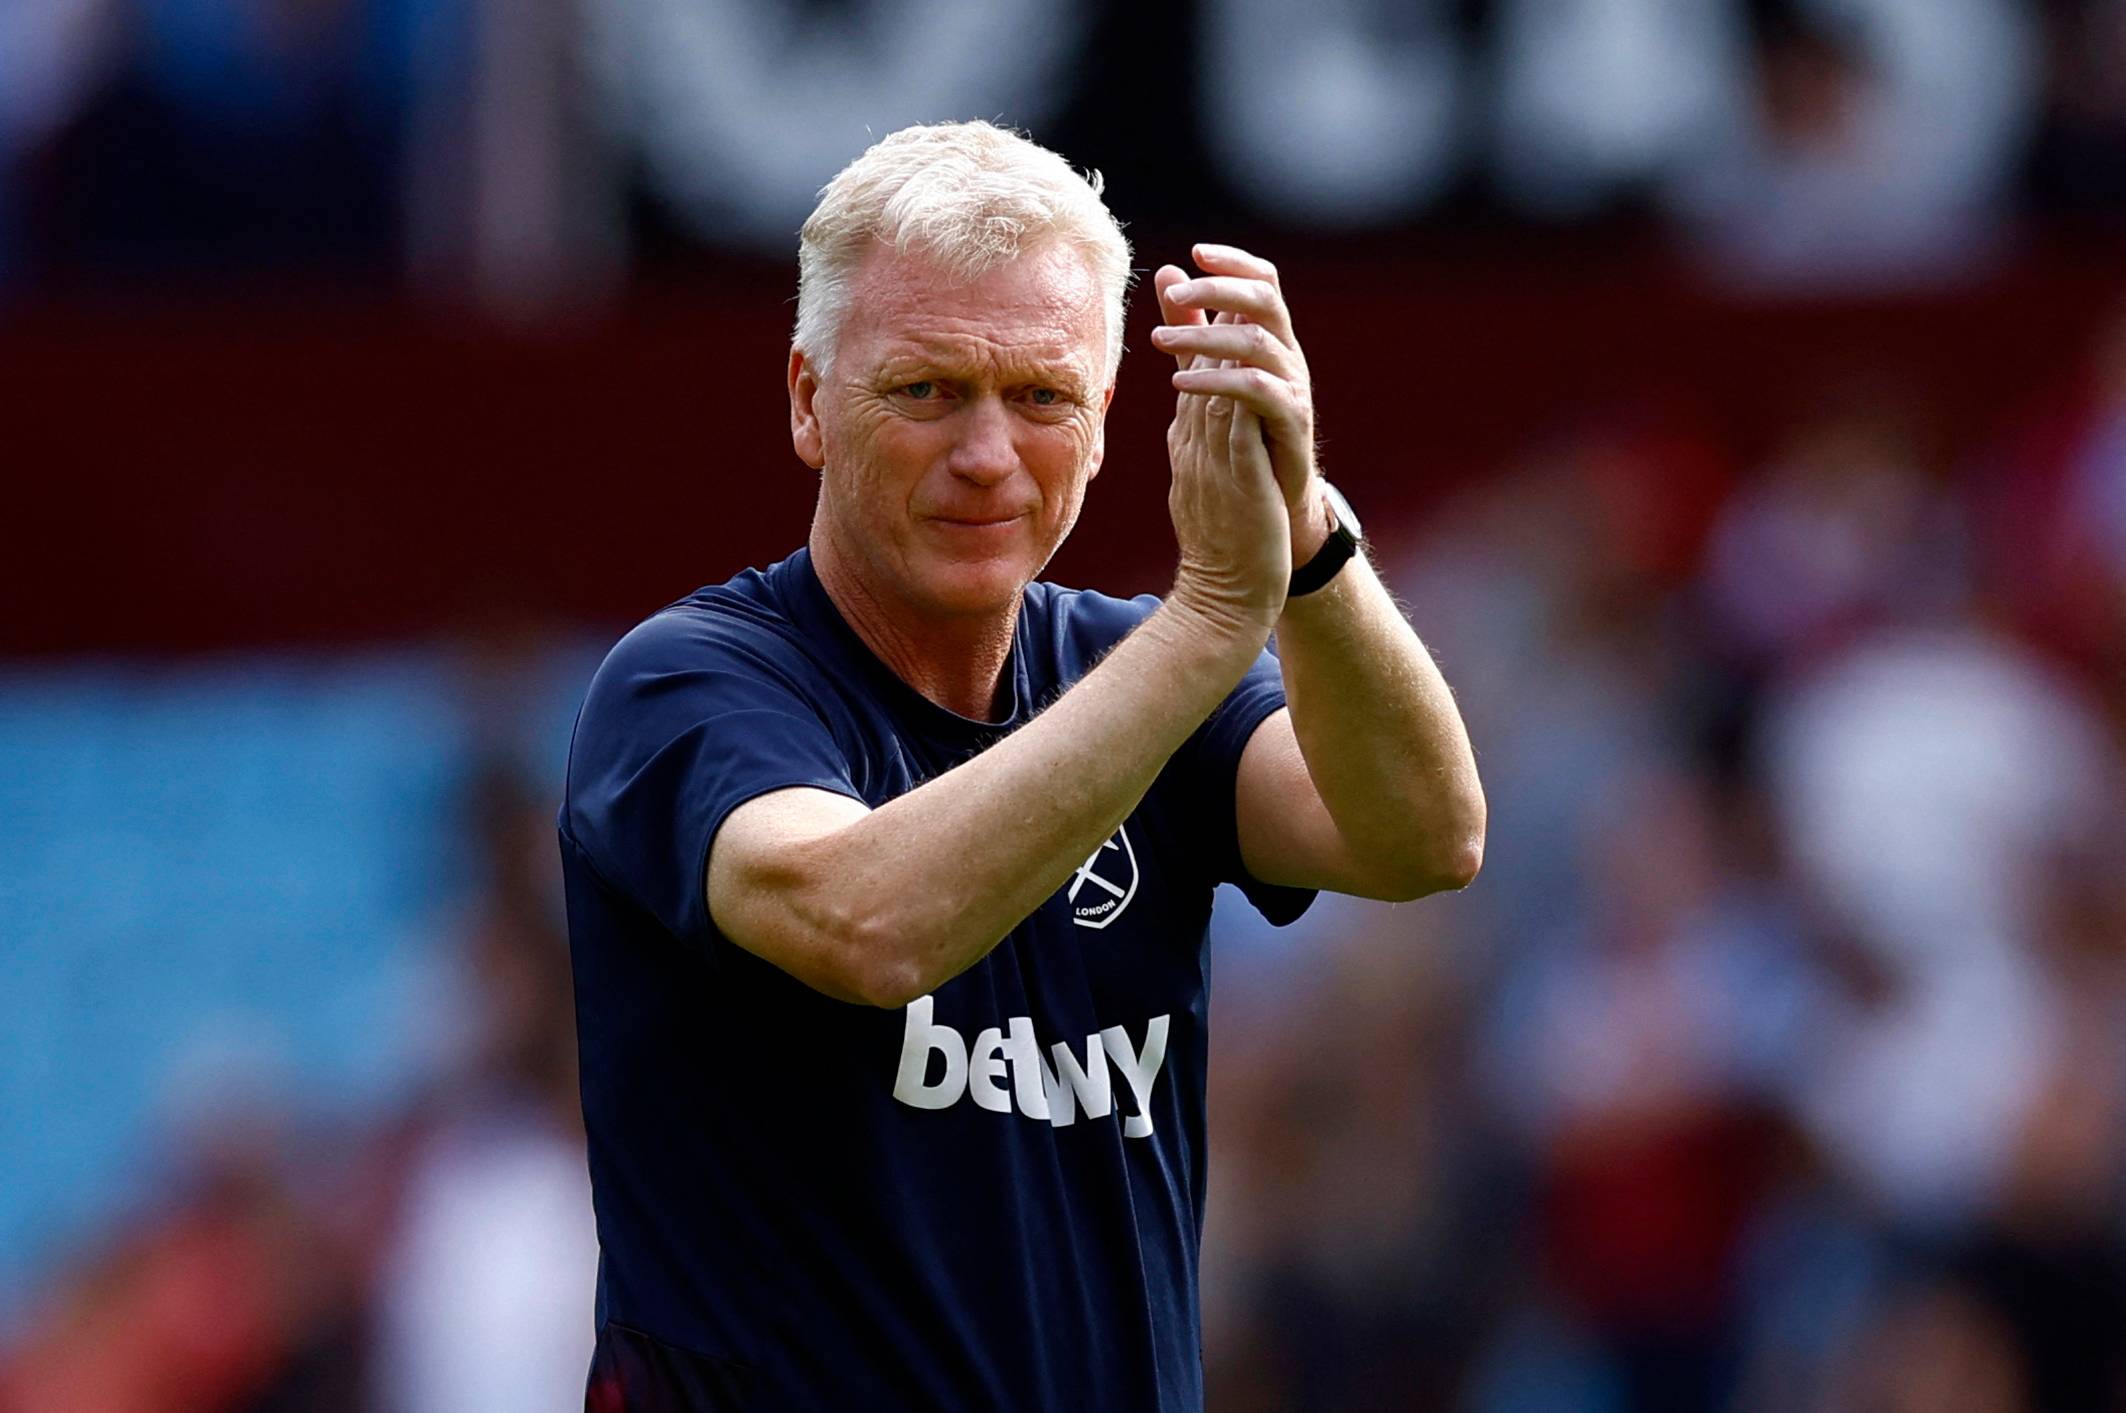 West Ham: GSBK have 'decision to make' over Moyes' future - Follow up